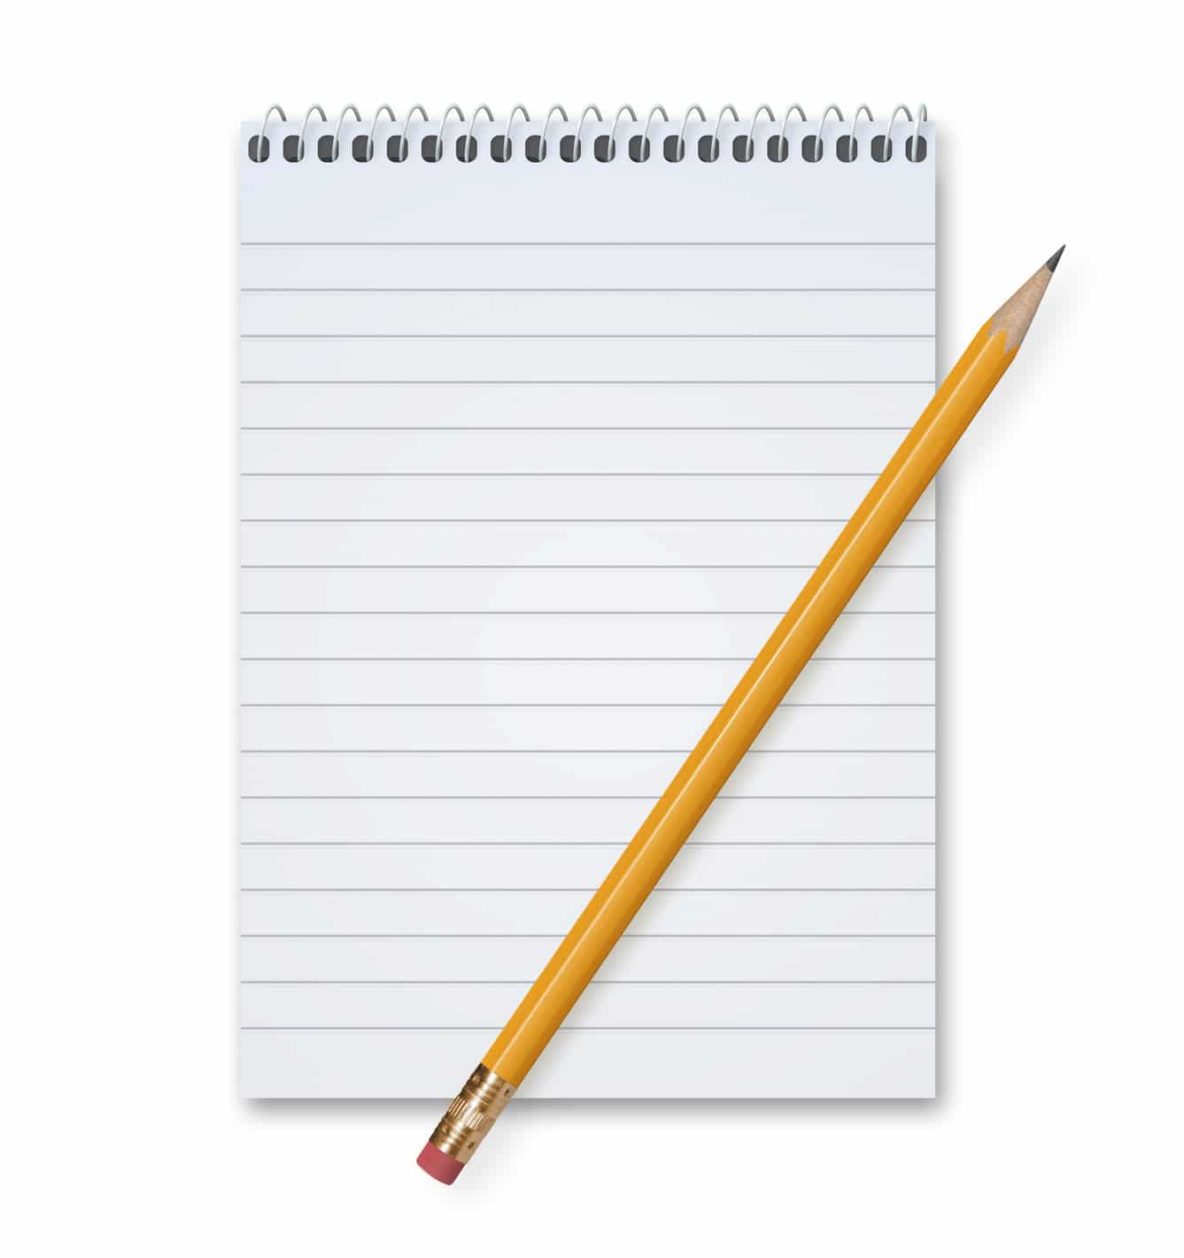 Orange Pencil on a blank notepad with metal spiral with lots of copy space, isolated on a white background with shadow.